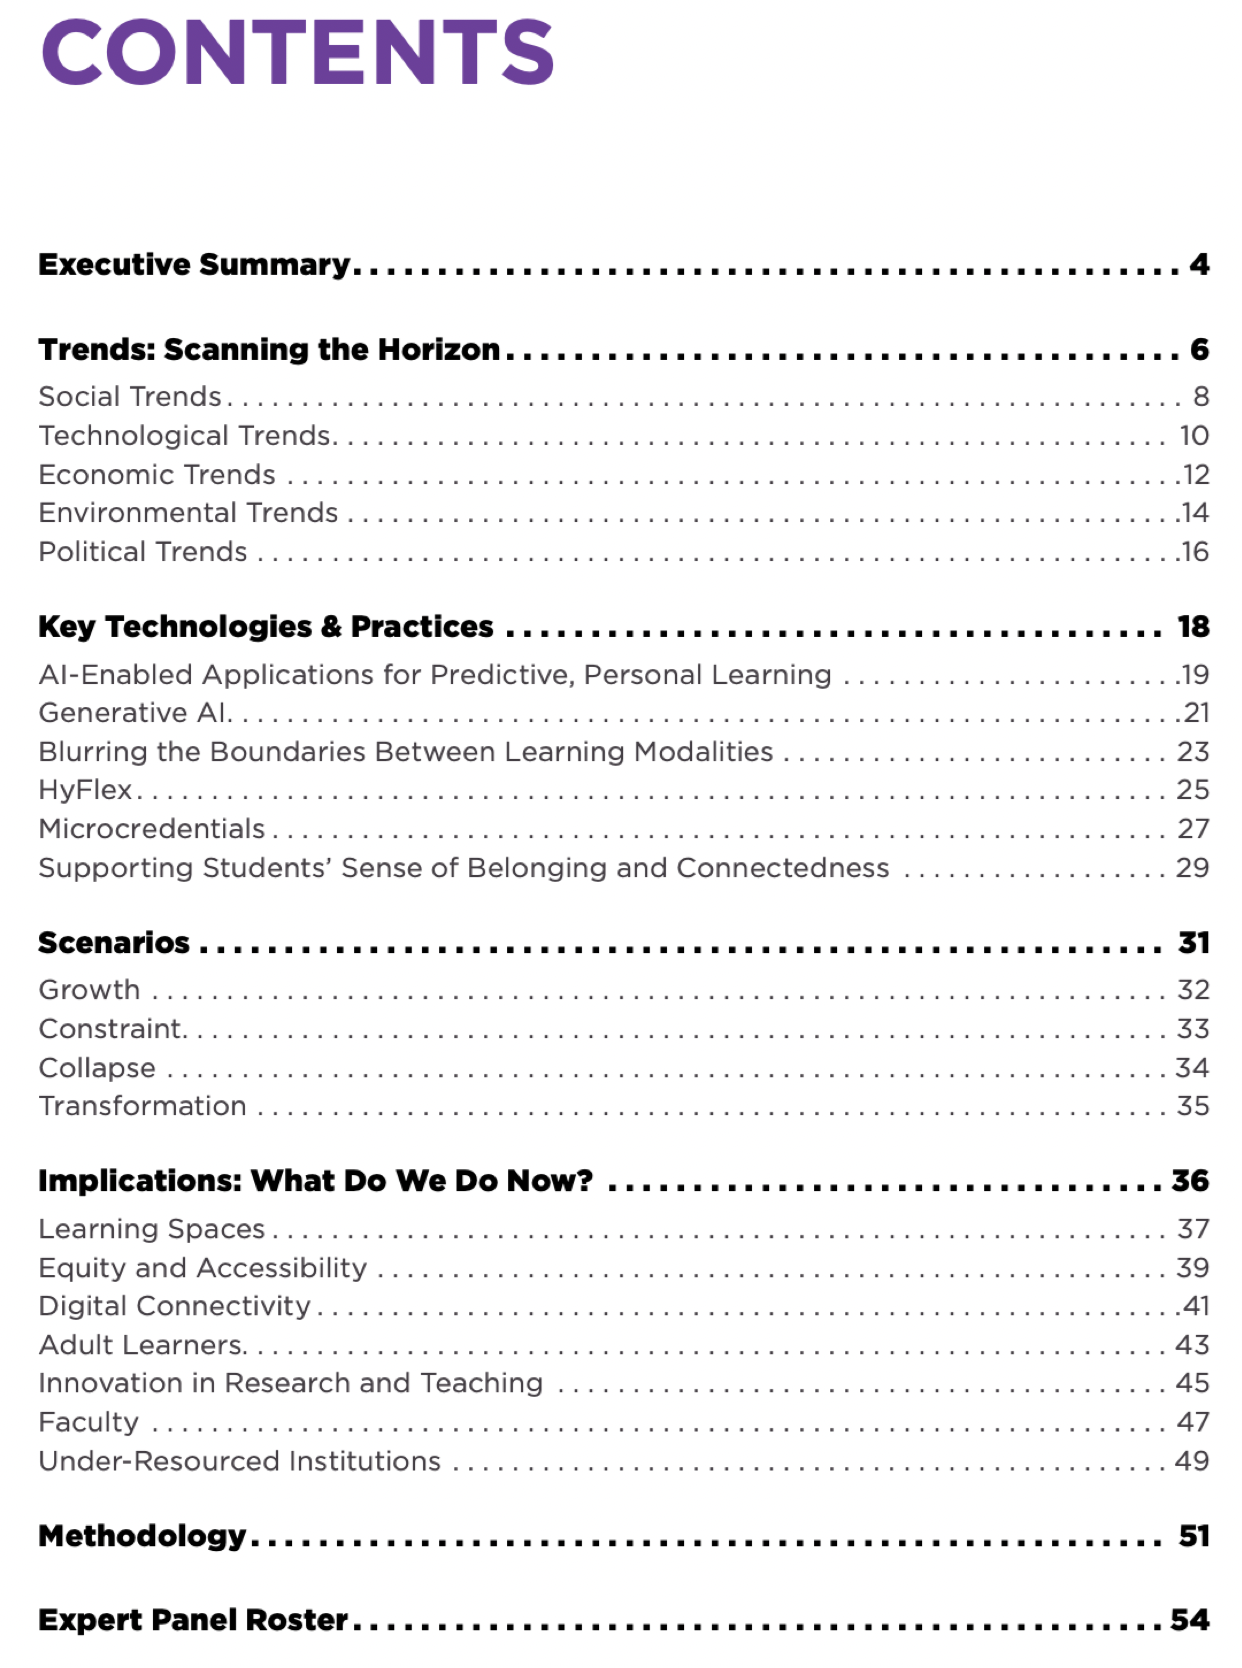 Just Released! 2023 EDUCAUSE Horizon Report Teaching and Learning Edition